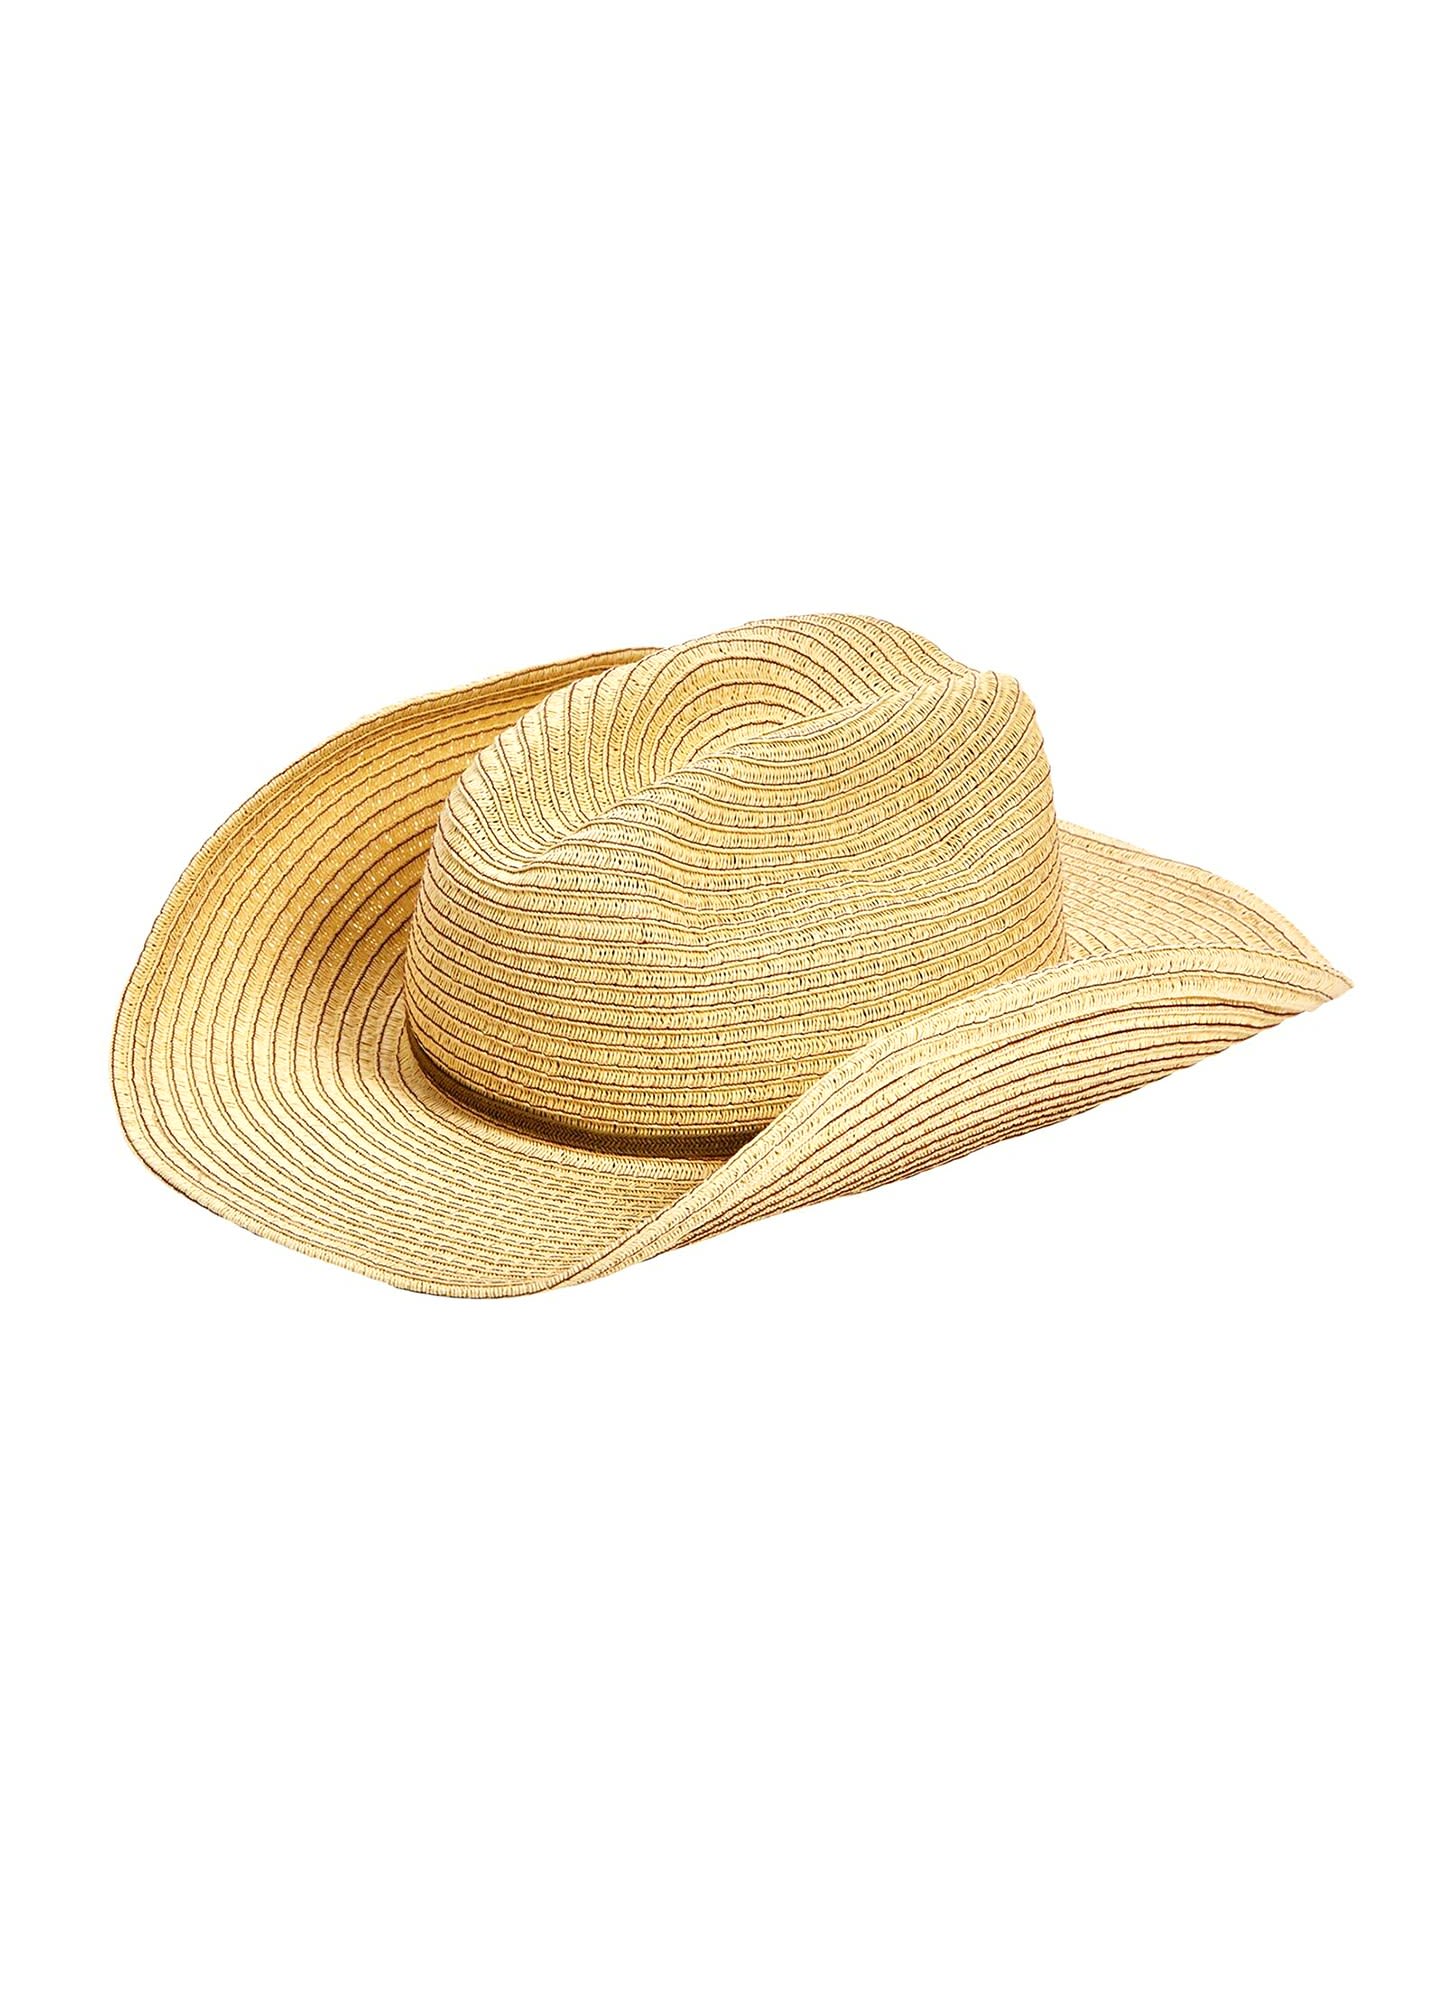 Seafolly Coyote Hat Beige- Female Caps und Hte- Grsse One Size - Farbe Natural unter Seafolly